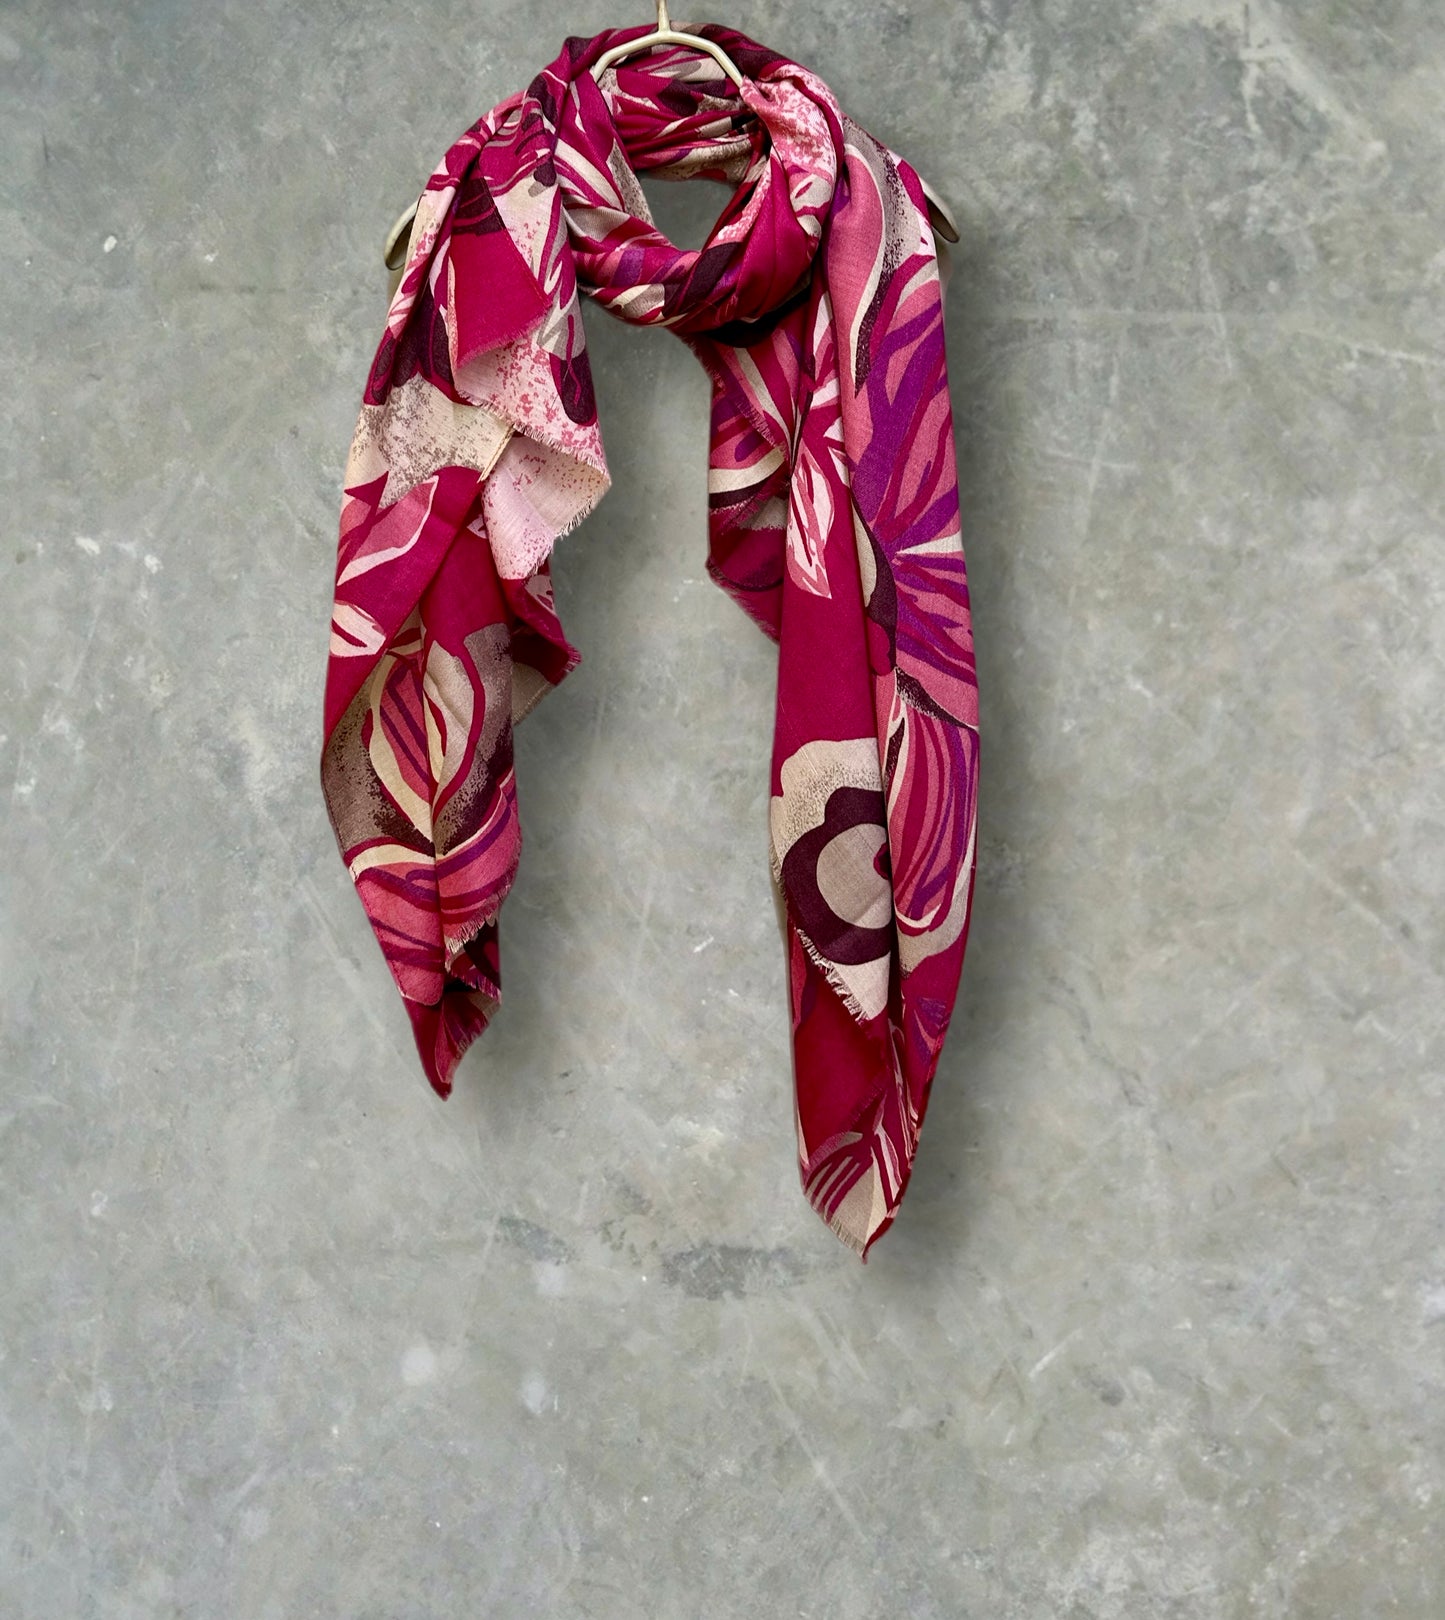 Vintage Inspired Pink Floral Scarf for Women,Perfect All-Year Accessory,Ideal Grey Gifts for Mother's Day,Birthday, and Christmas.